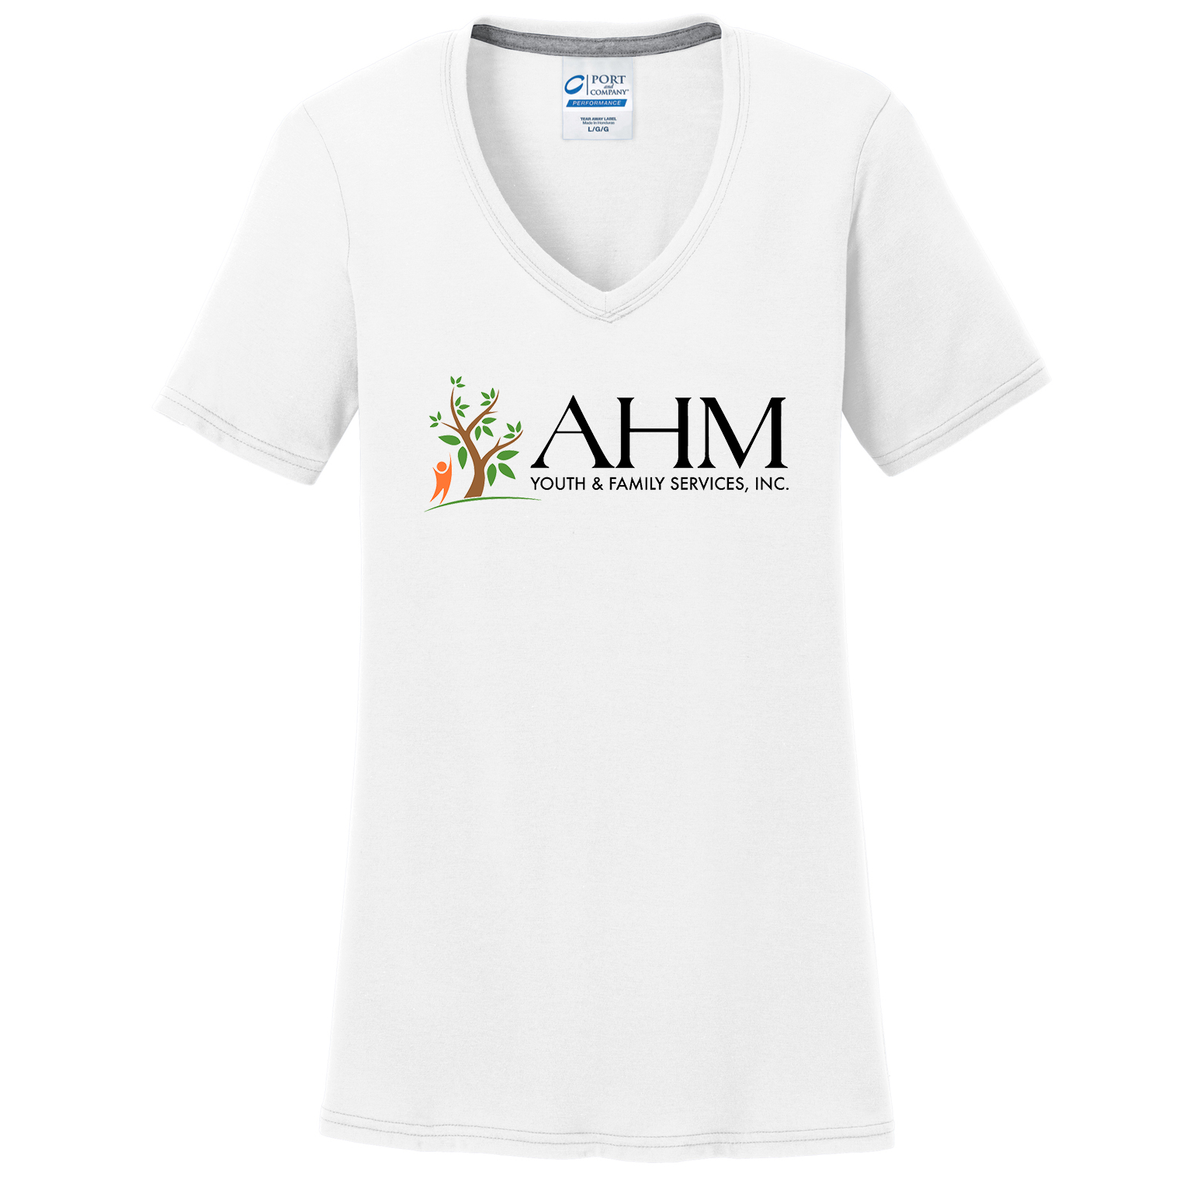 AHM Youth & Family Services Women's T-Shirt